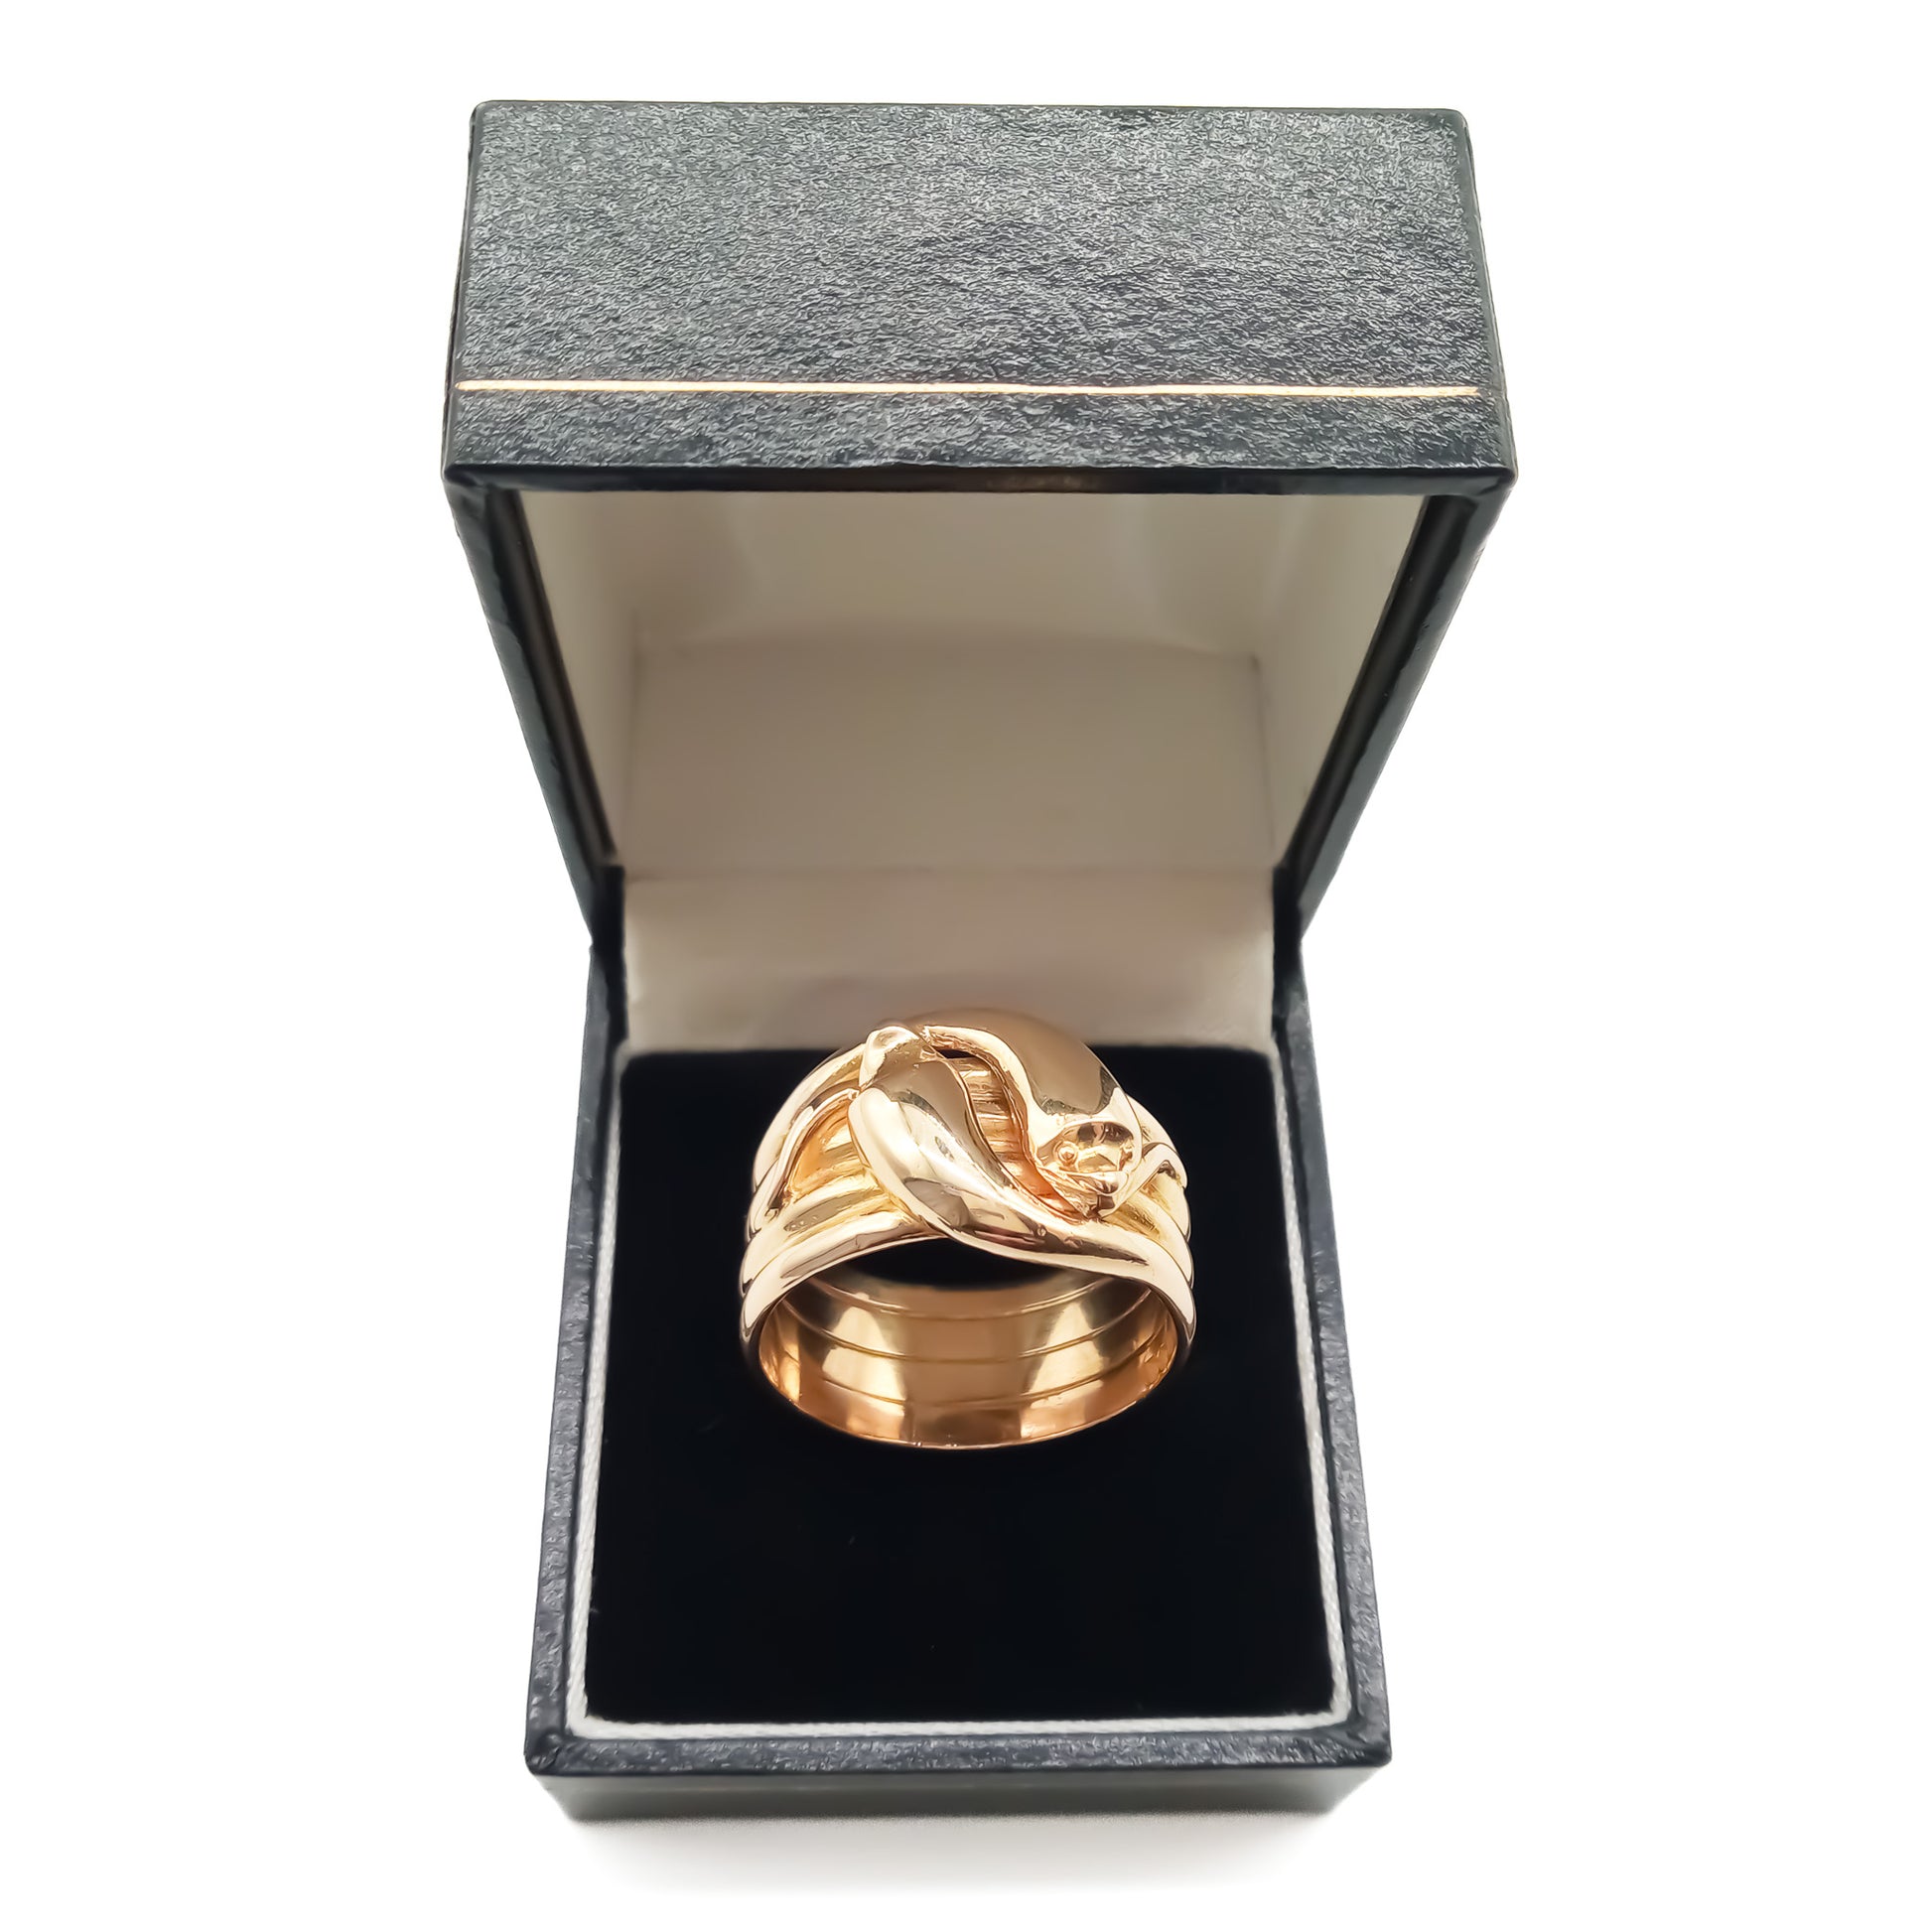 Stunning chunky Victorian 18ct gold ring with two intertwined serpents. Chester 1878.